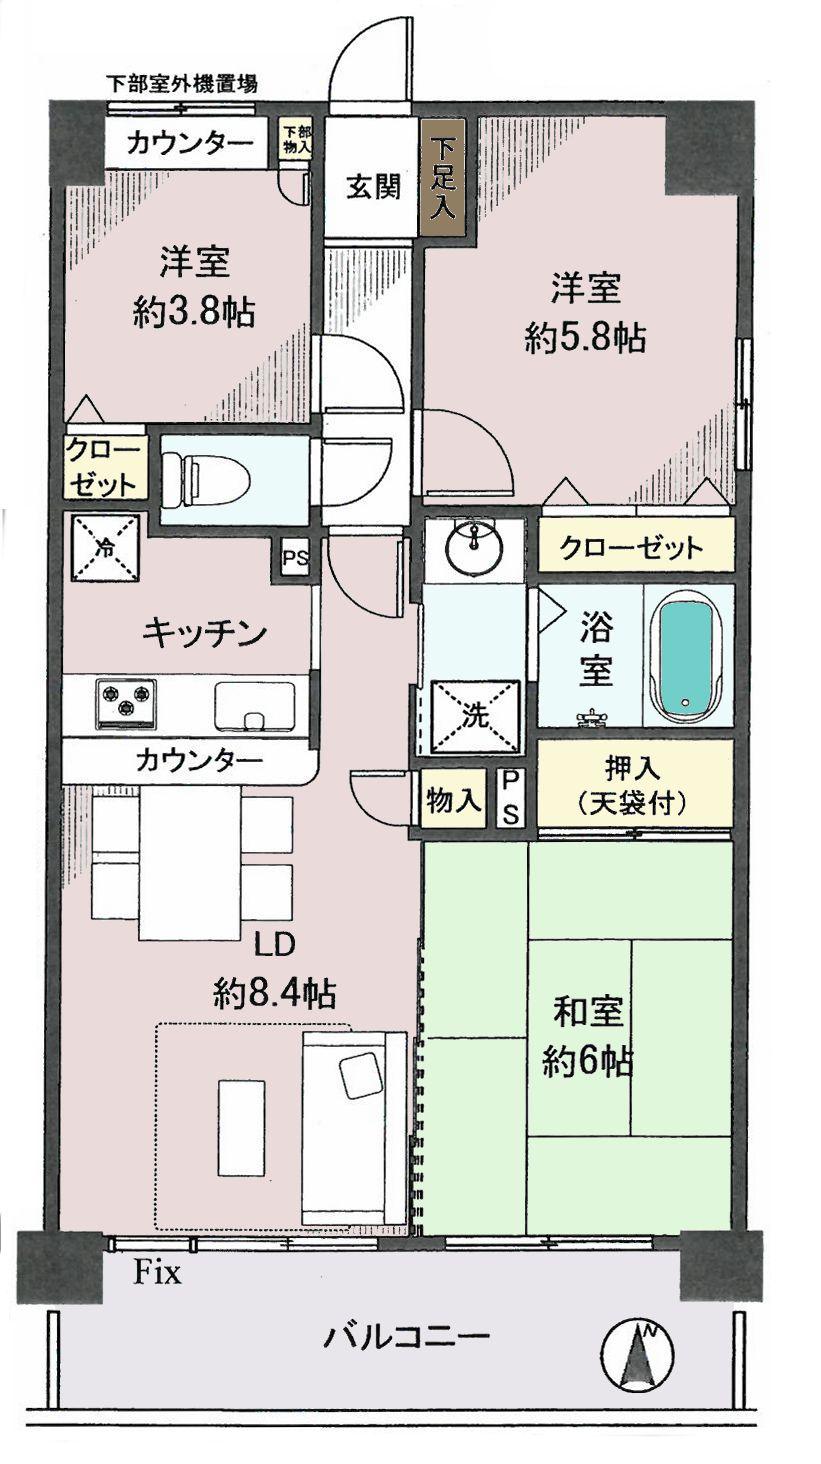 Floor plan. 3LDK, Price 25,800,000 yen, Footprint 60 sq m , When the balcony area 9 sq m house is changed, Change views ~ By all means please see once ~